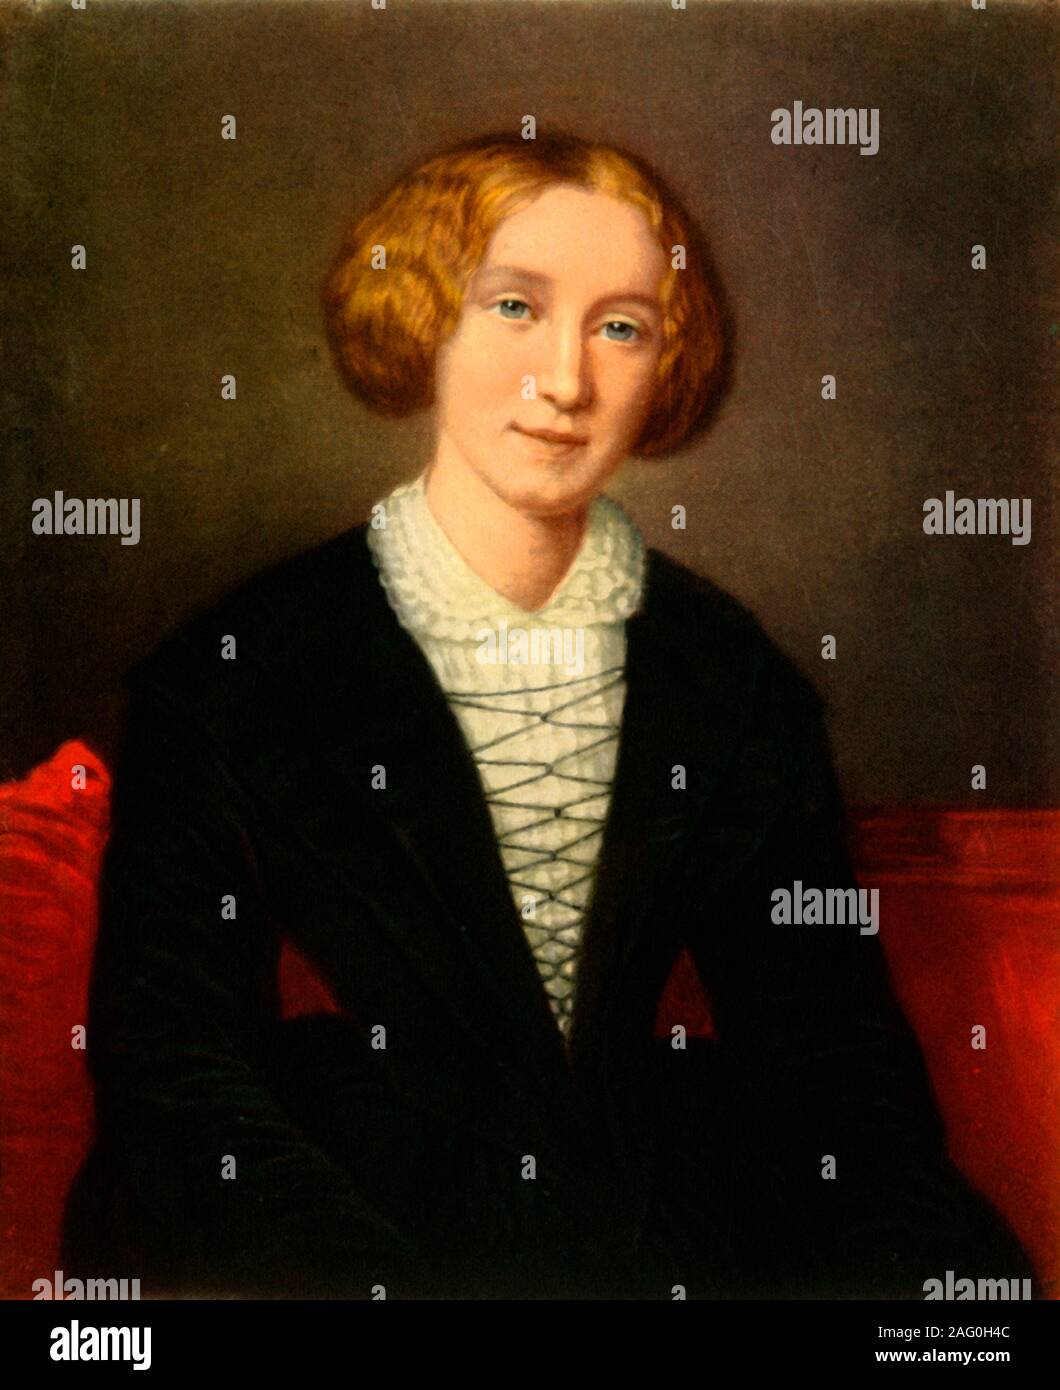 'George Eliot', c1850, (1942). Portrait of British author George Eliot (1819-1880), born Mary Ann Evans. Painting in the National Portrait Gallery, London. From &quot;English Women&quot;, by Edith Sitwell. [Collins, London, 1942] Stock Photo